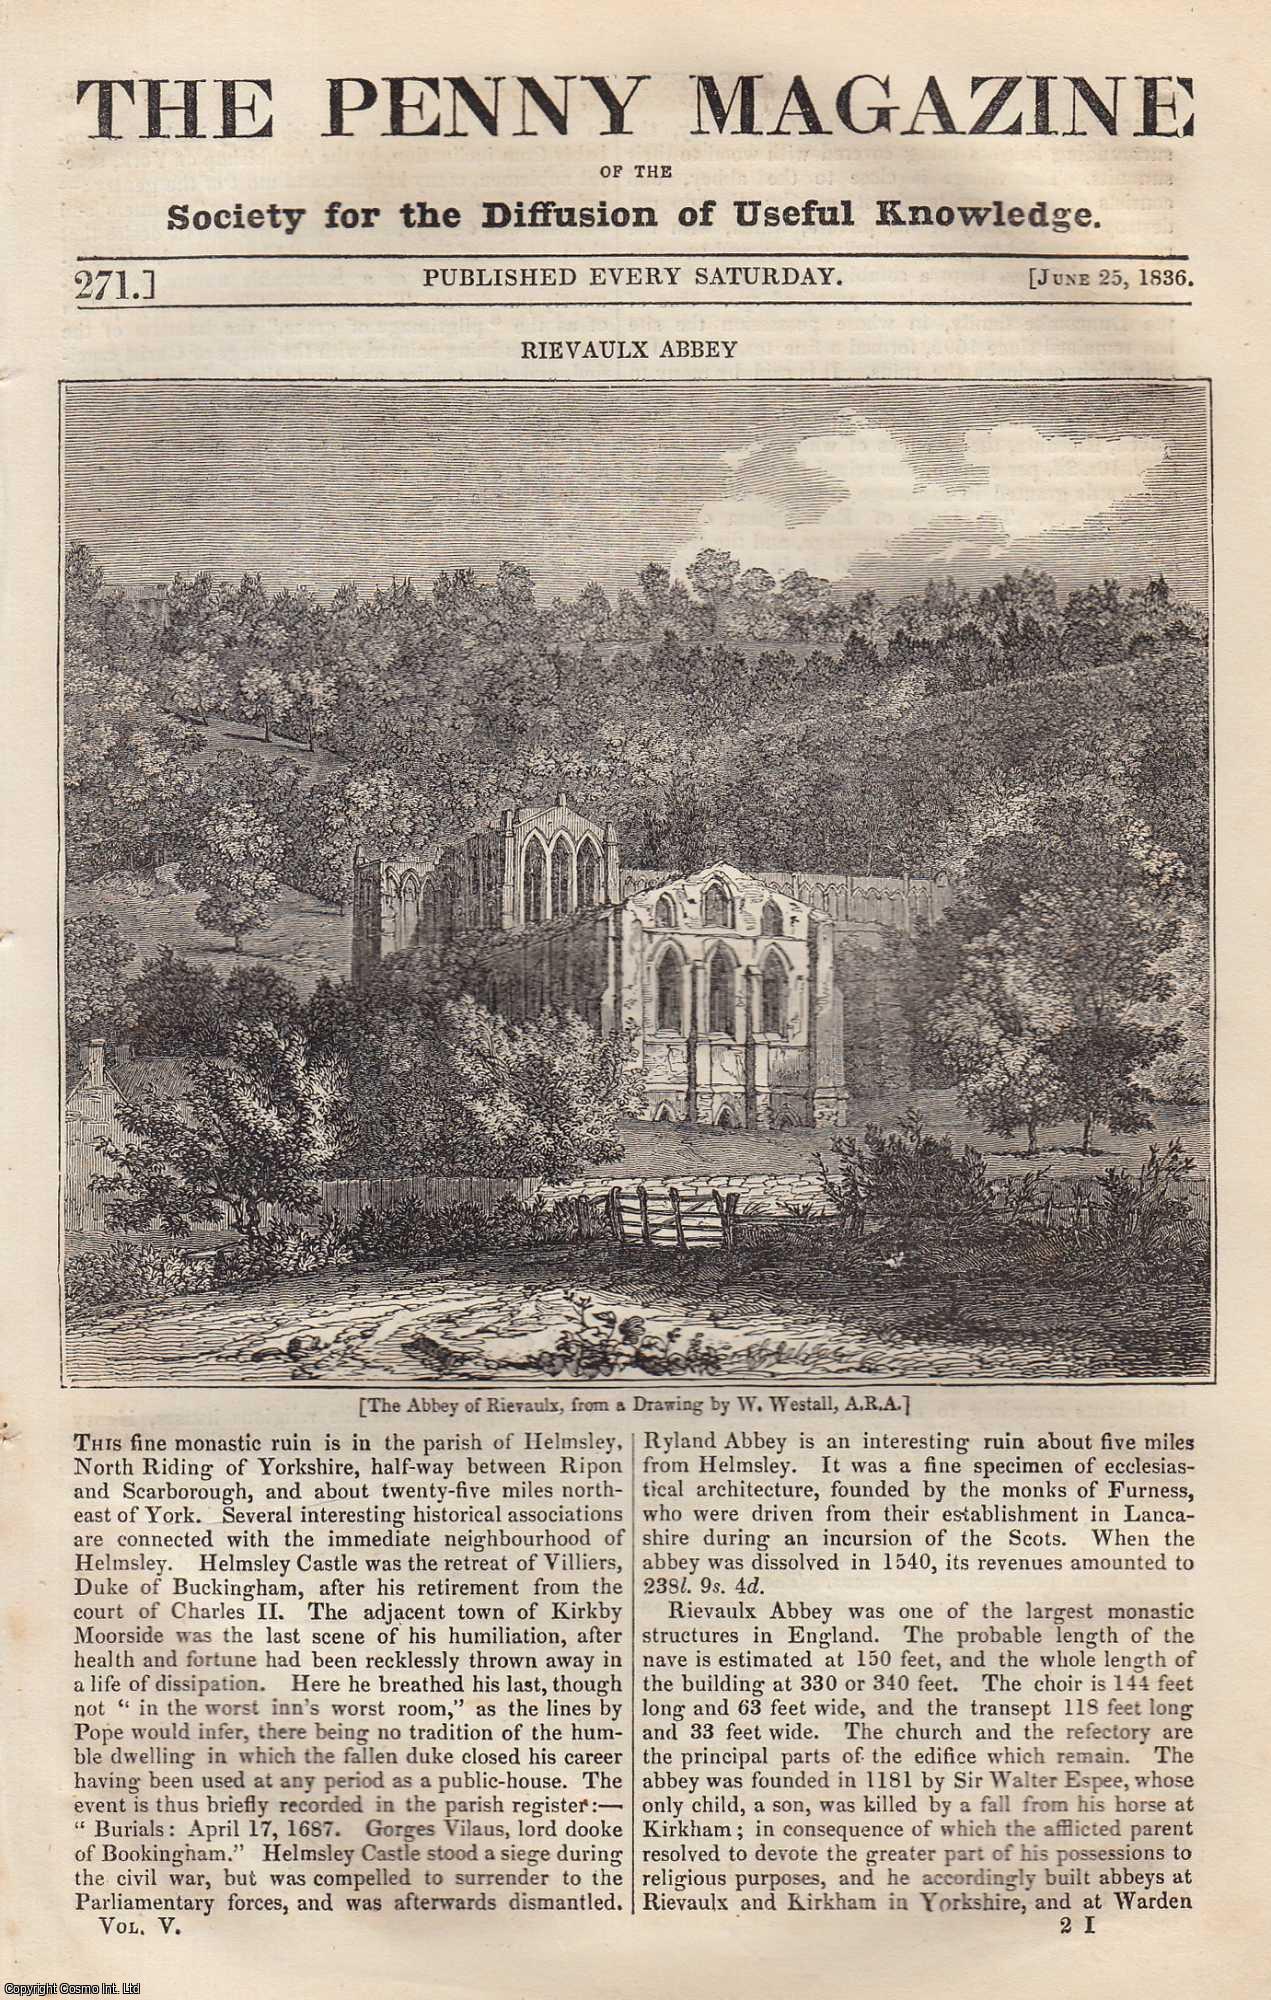 Penny Magazine - The Abbey of Rievaulx, England; Manners of The Northern Coal Miners; The Pinacothek: National Galleries For The Fine Arts of Munich, etc. Issue No. 271, 1836. A complete original weekly issue of the Penny Magazine, 1836.